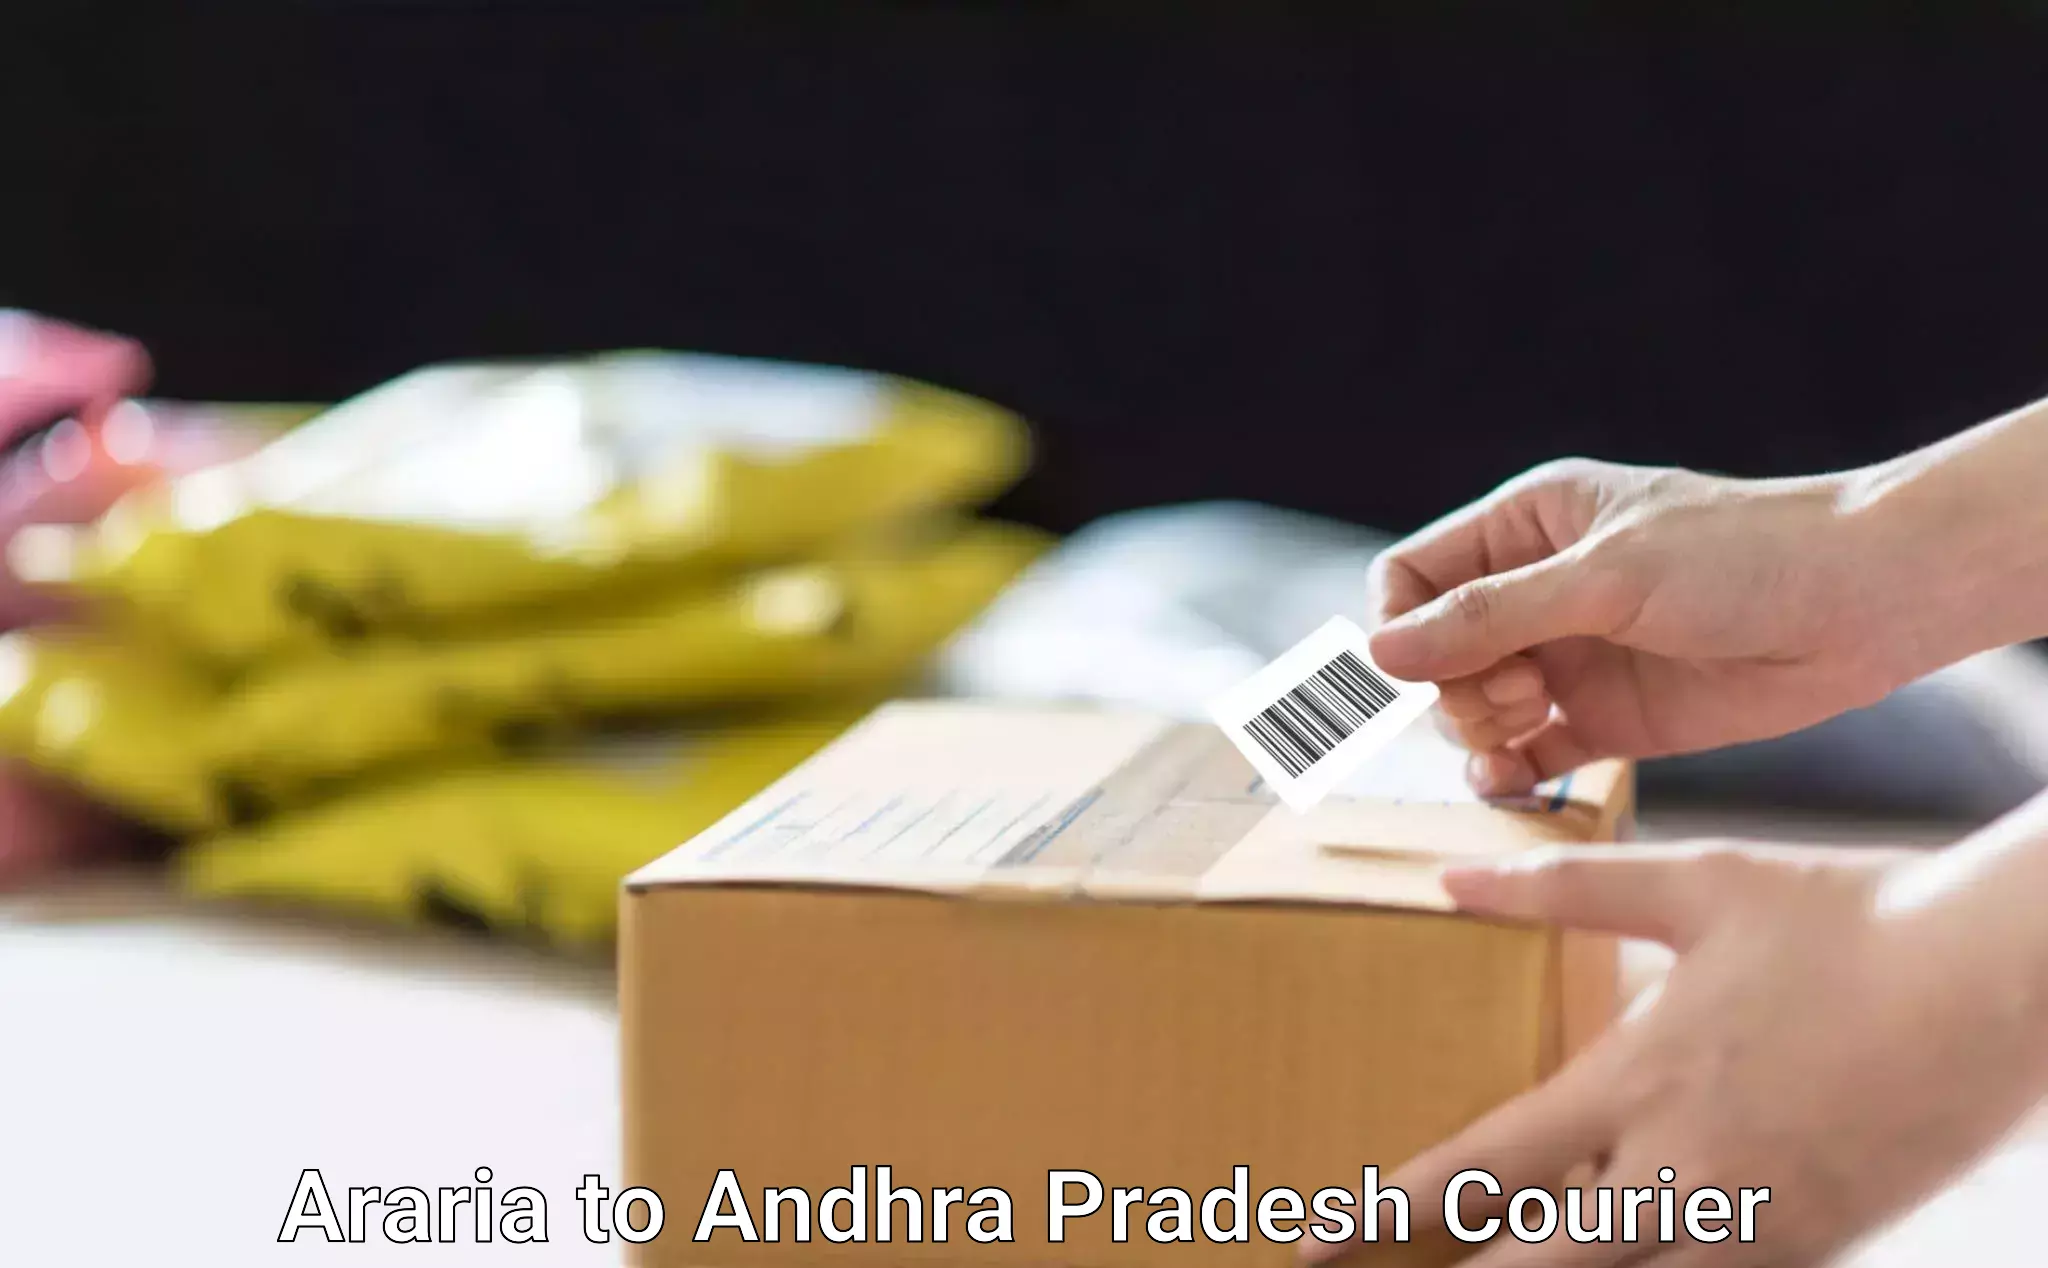 Trusted relocation experts Araria to Andhra Pradesh